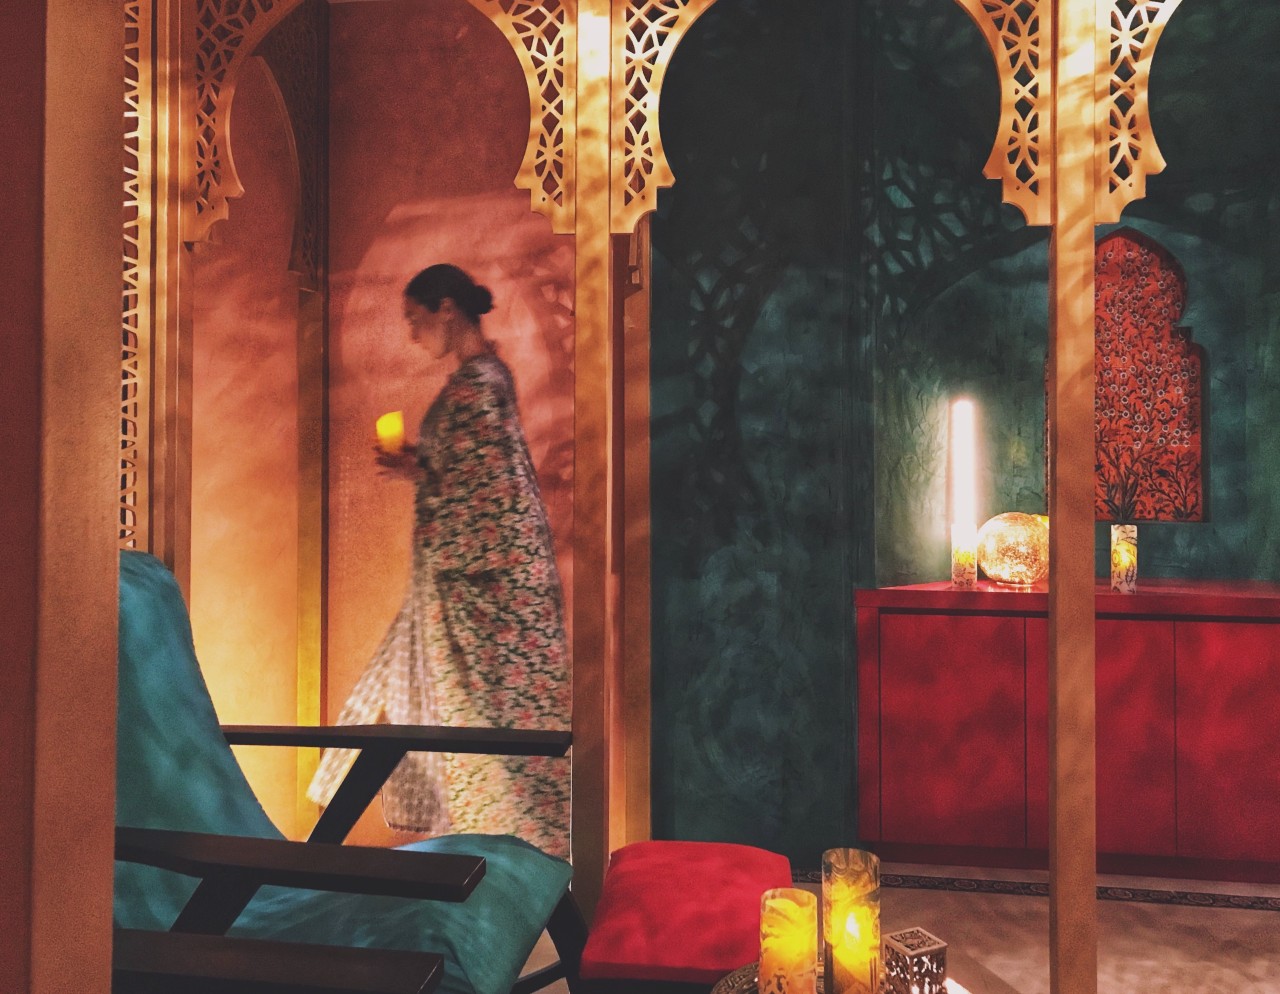 Hammam SPA: A Dazzling Hammam Experience Inspired by Morocco and Turkey 